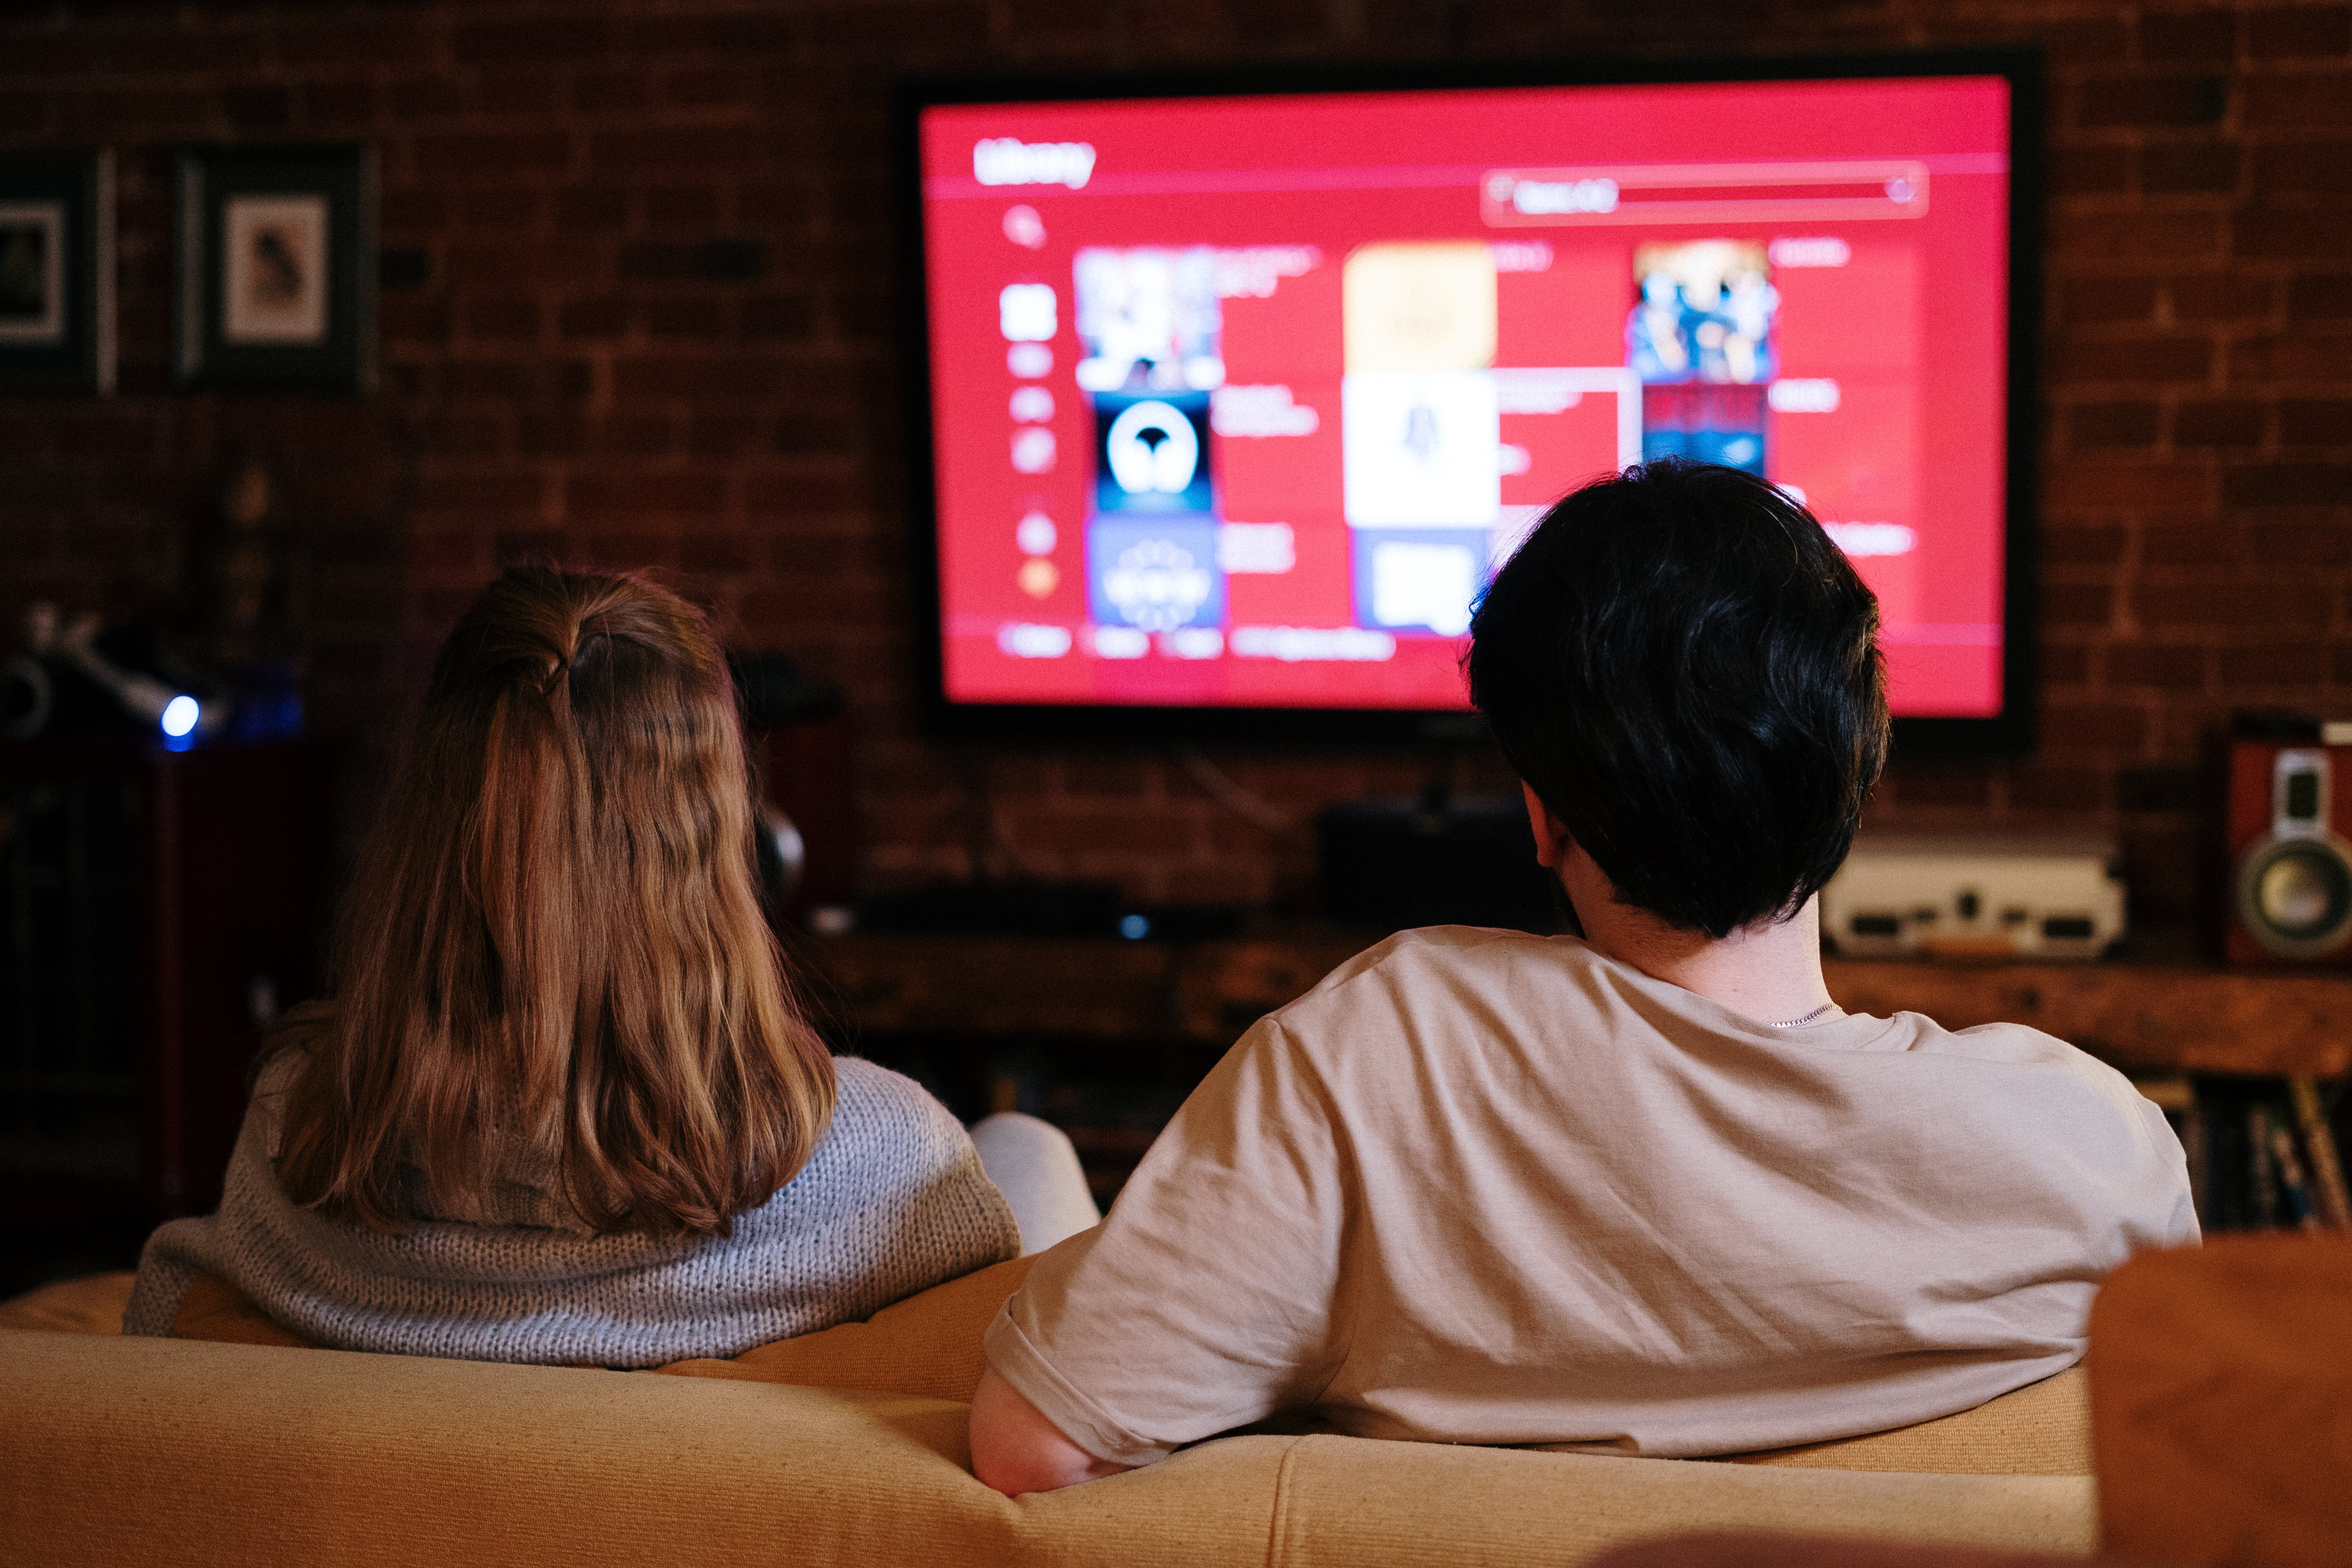 A man and a woman watching television together | Source: Pexels